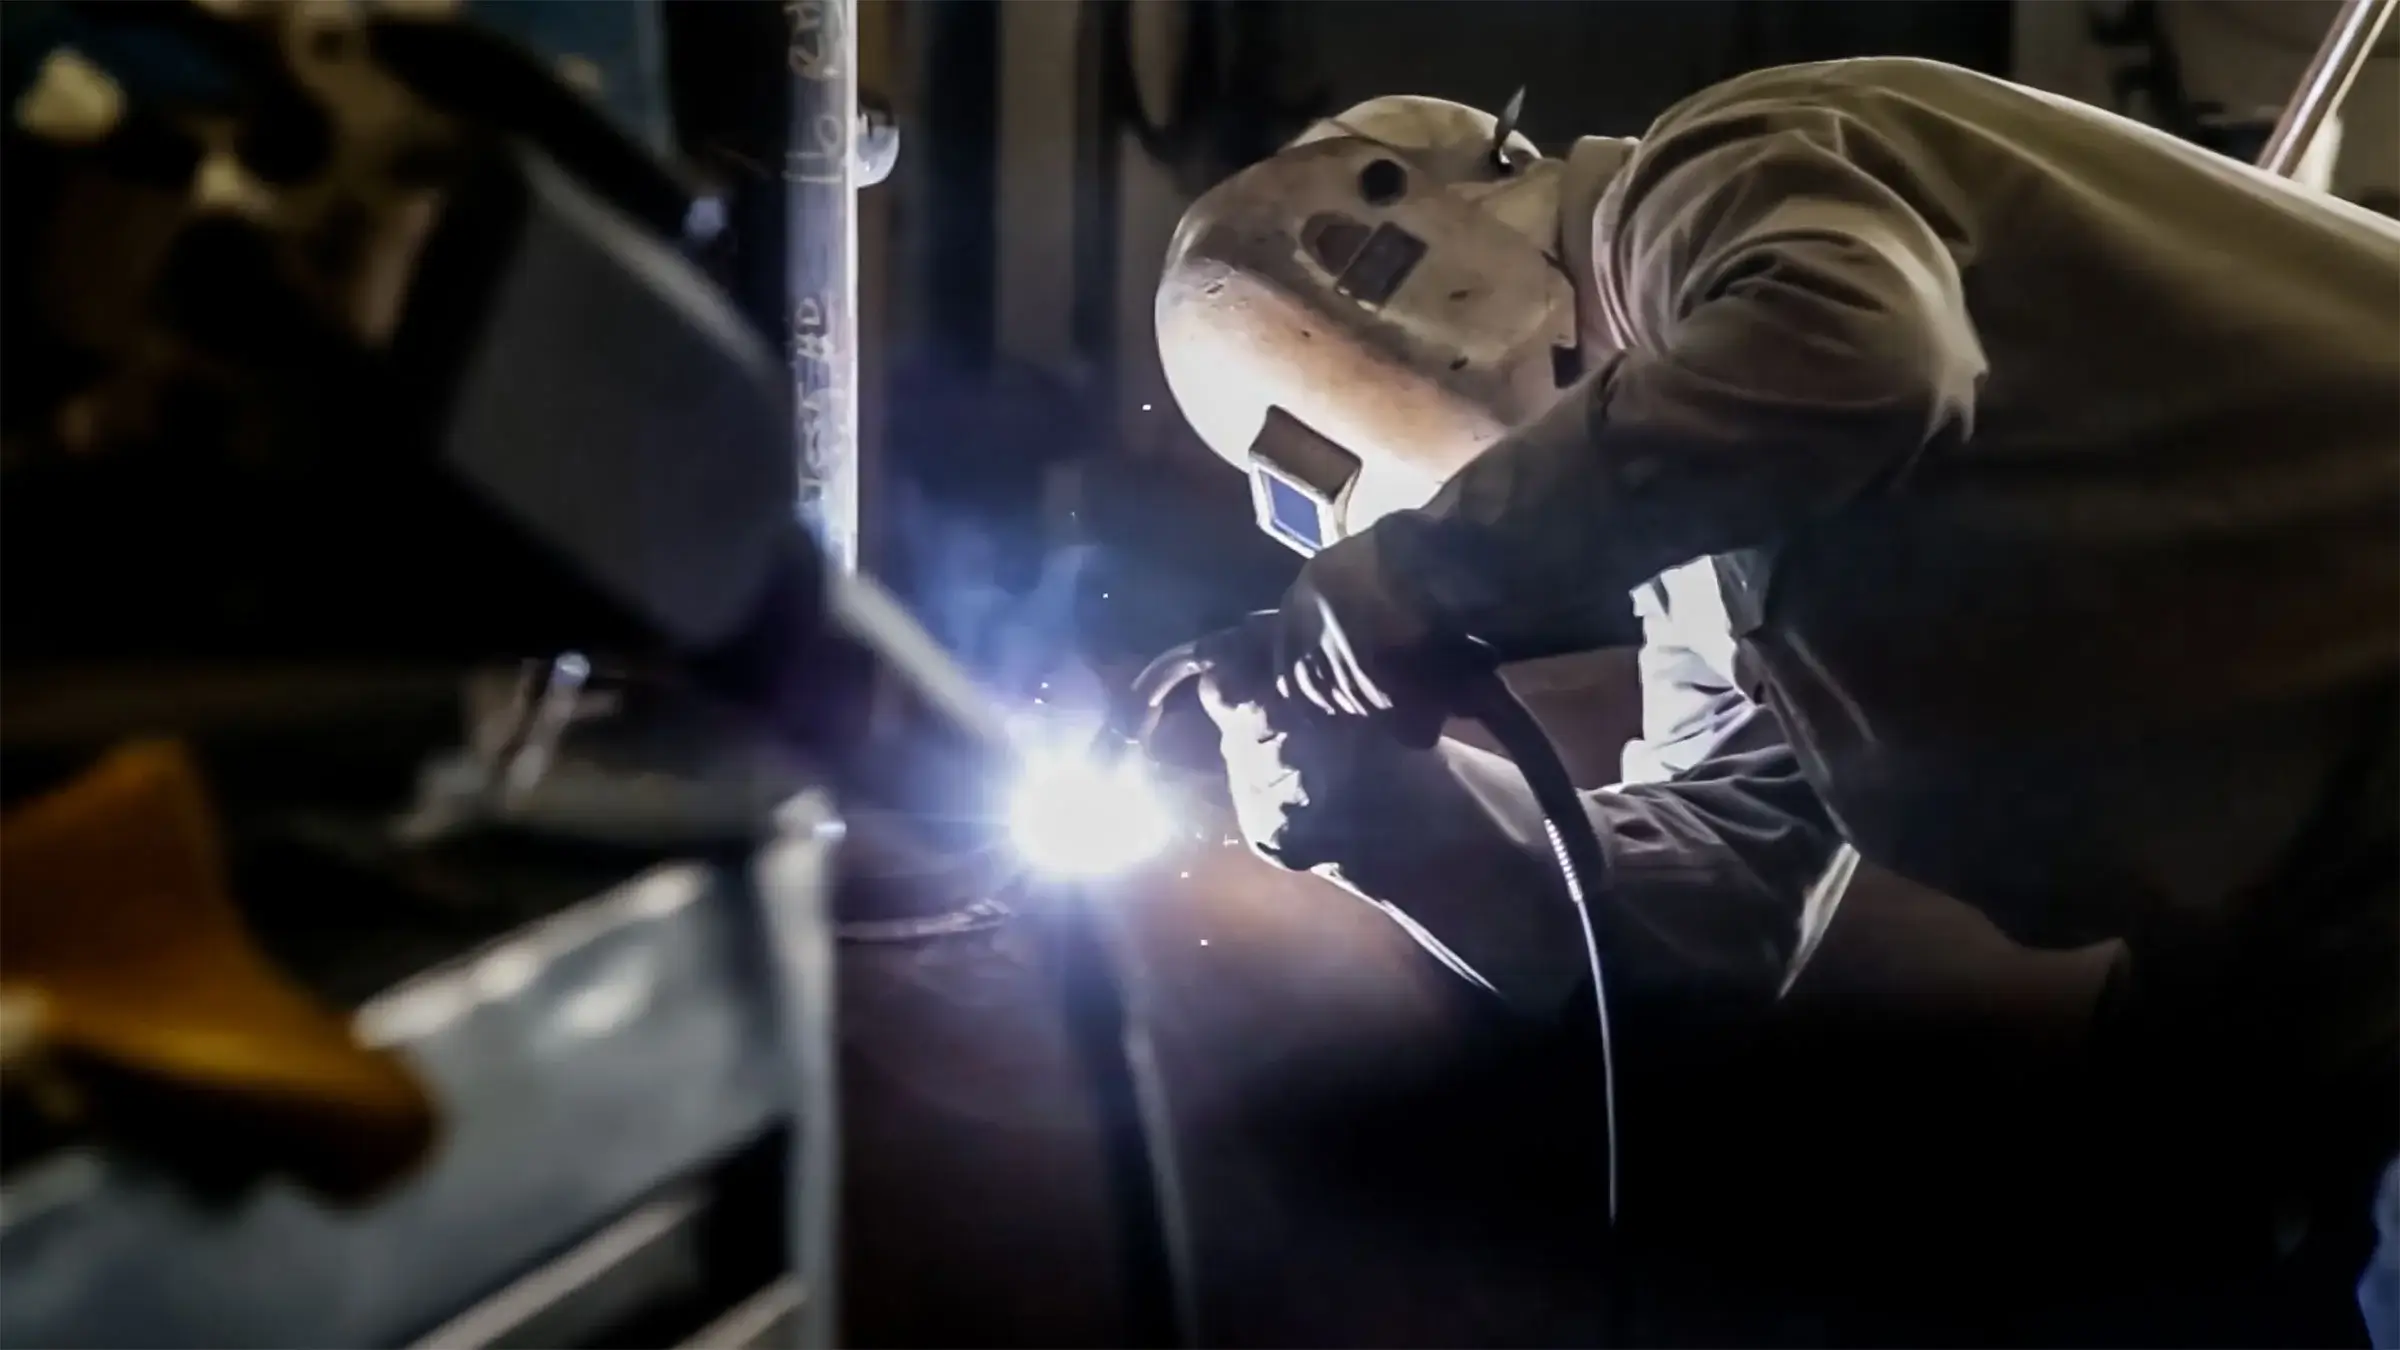 A welder works on a small fabrication job.